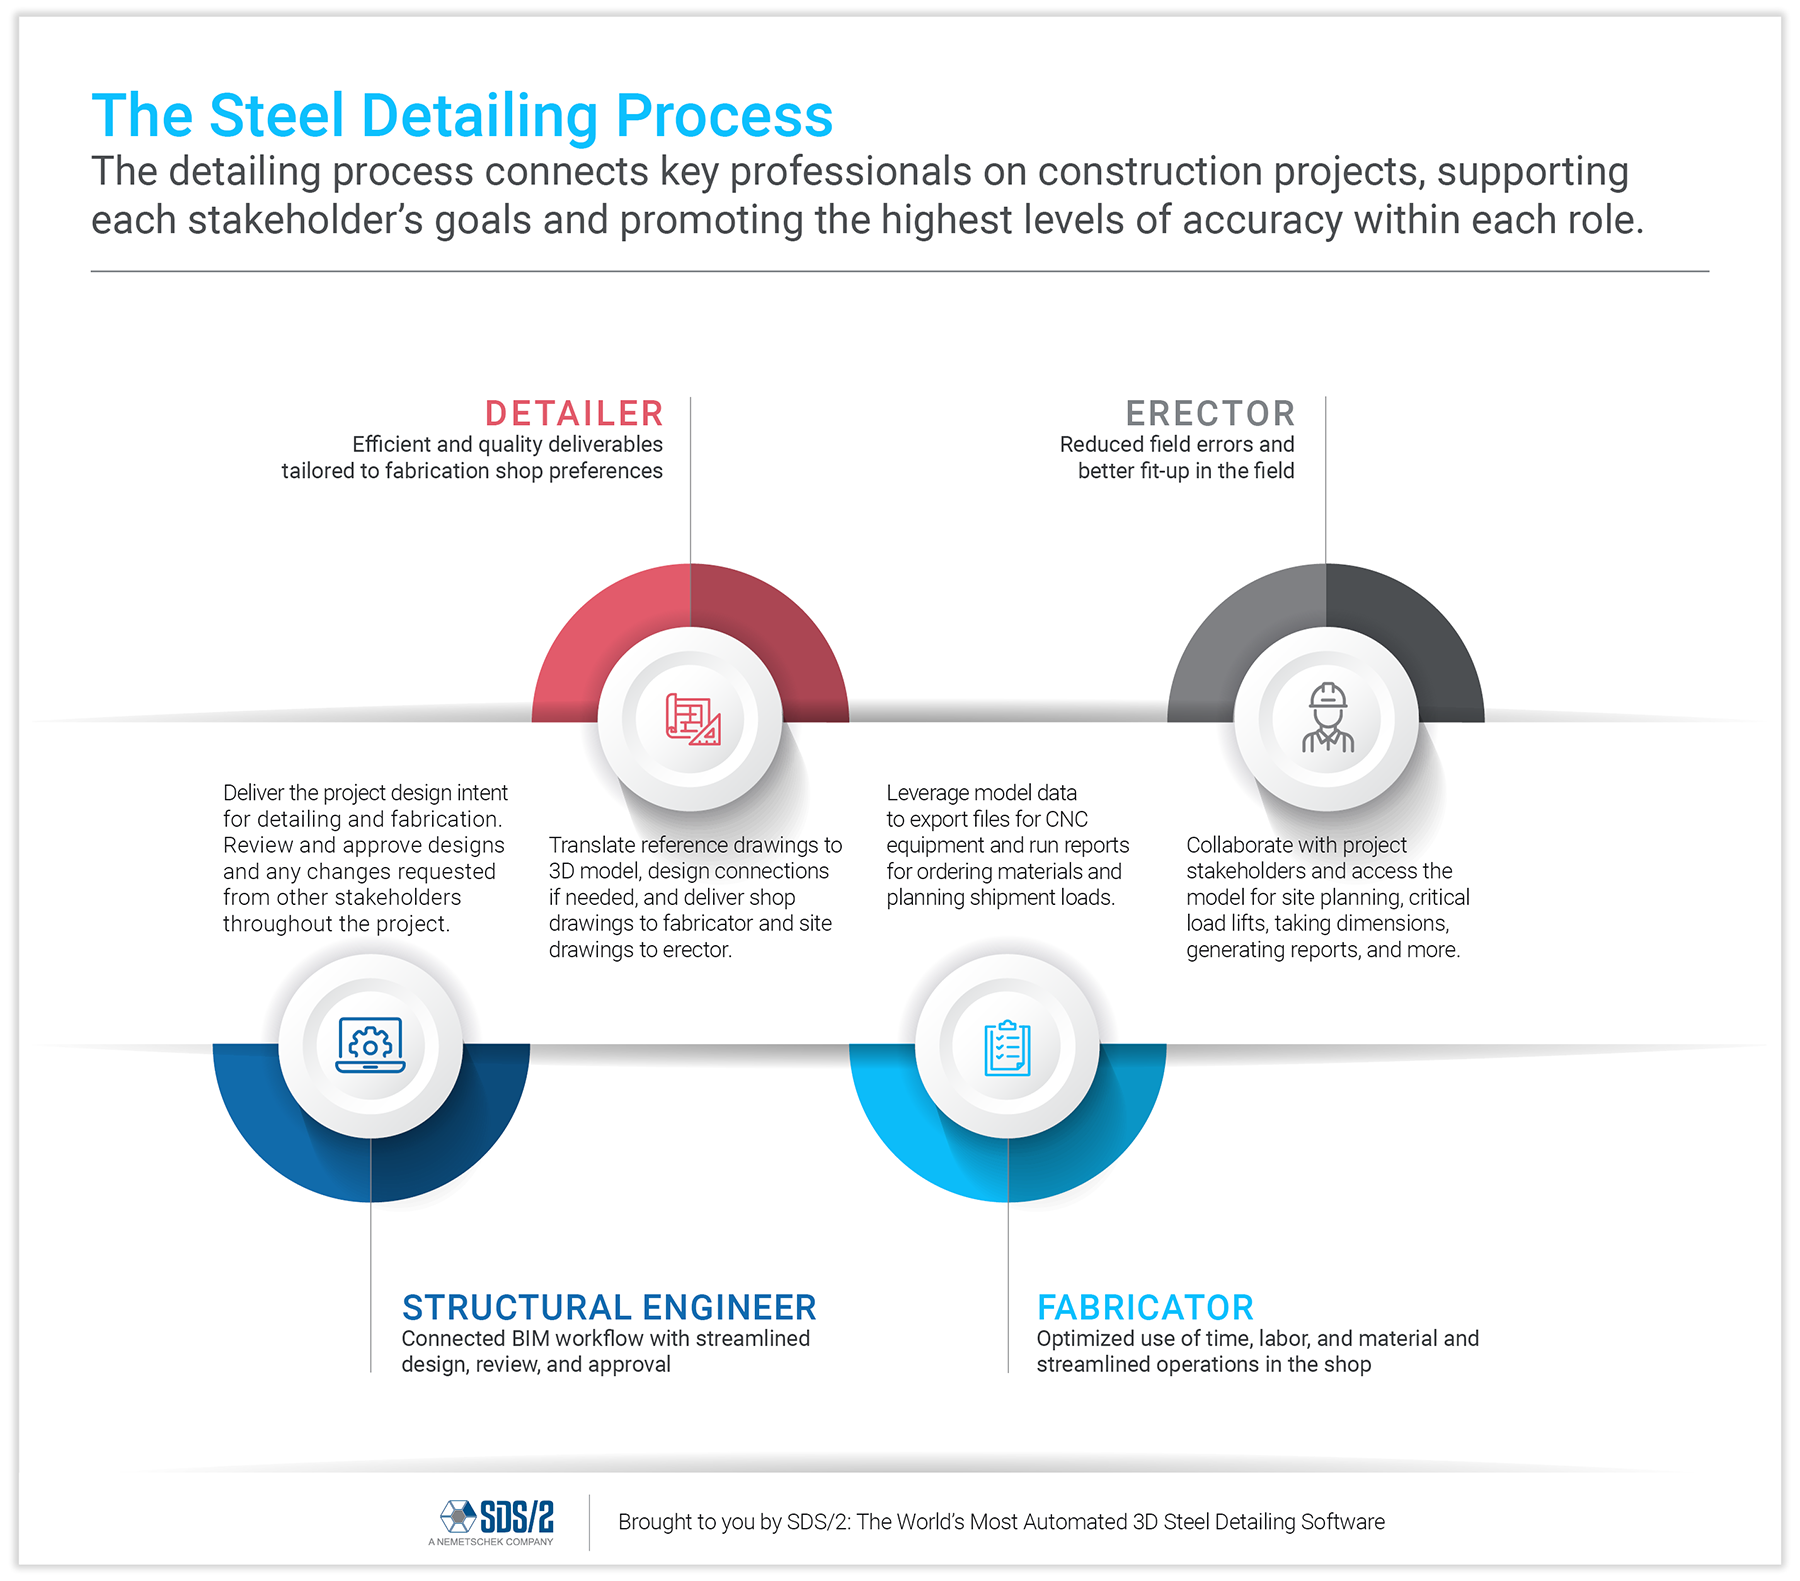 An infographic of the steel detailing process